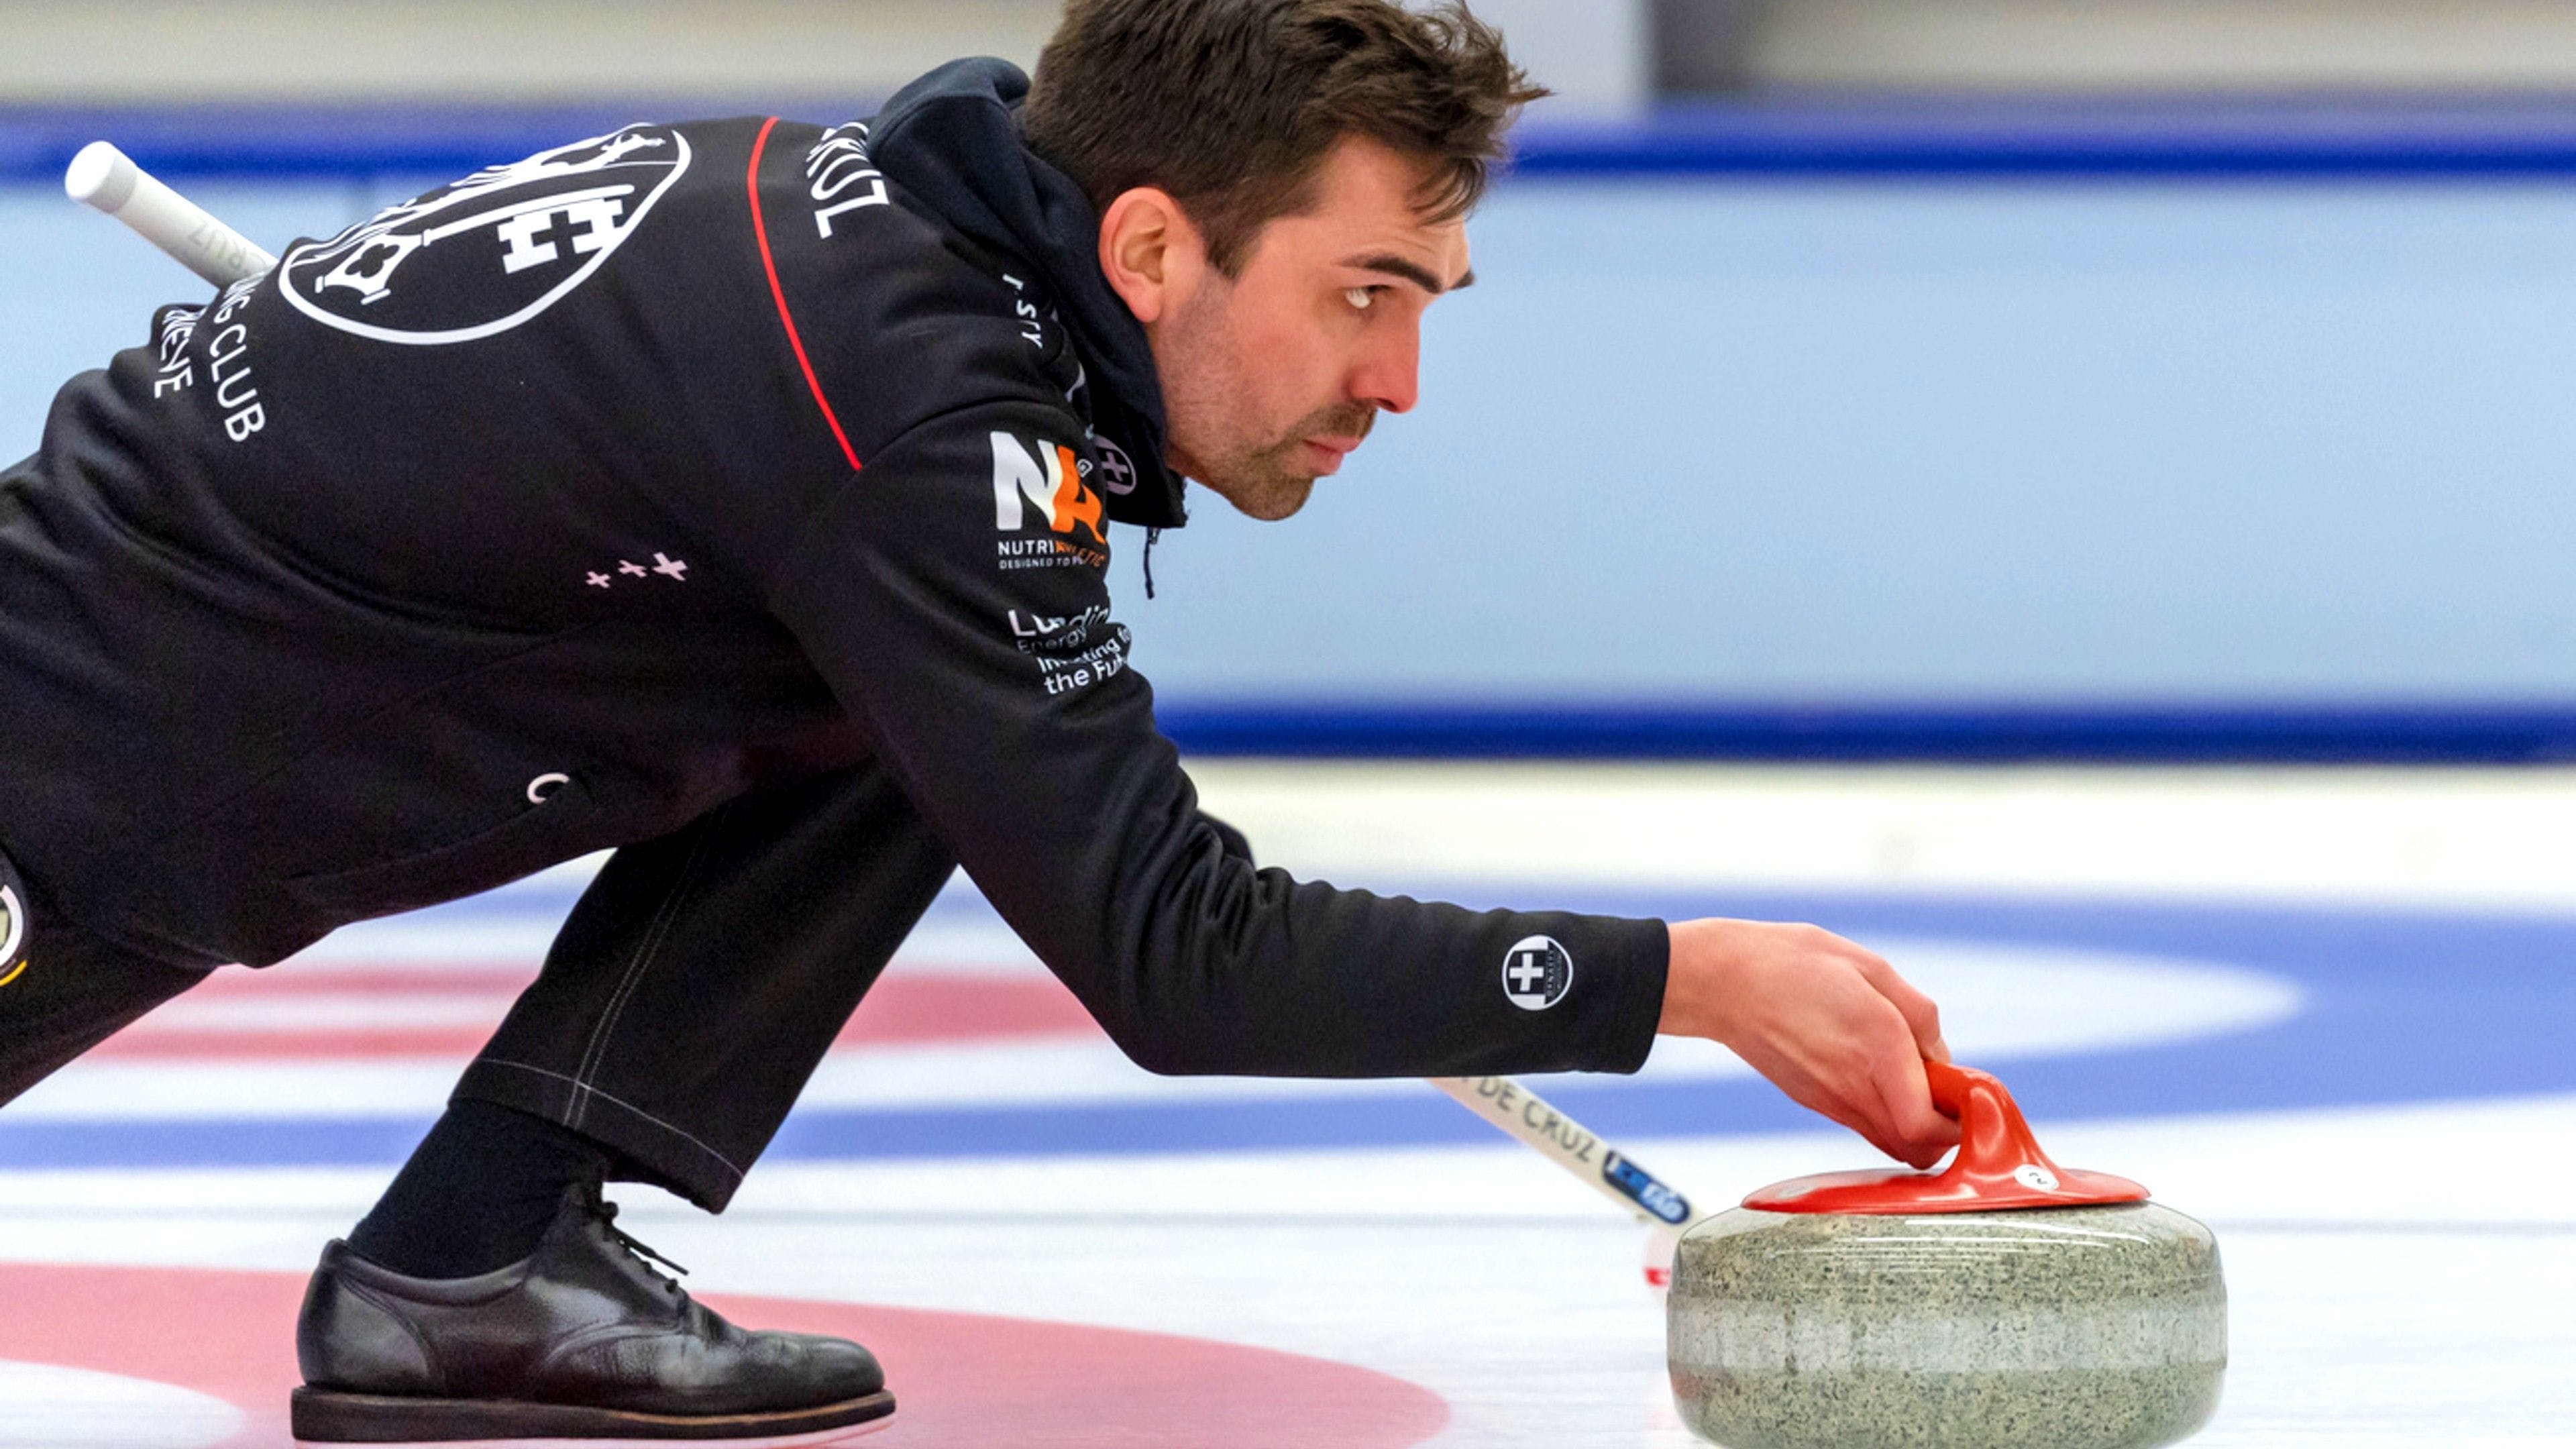 Curling: A man slides heavy, polished granite stone across the ice sheet toward the house. 3840x2160 4K Wallpaper.